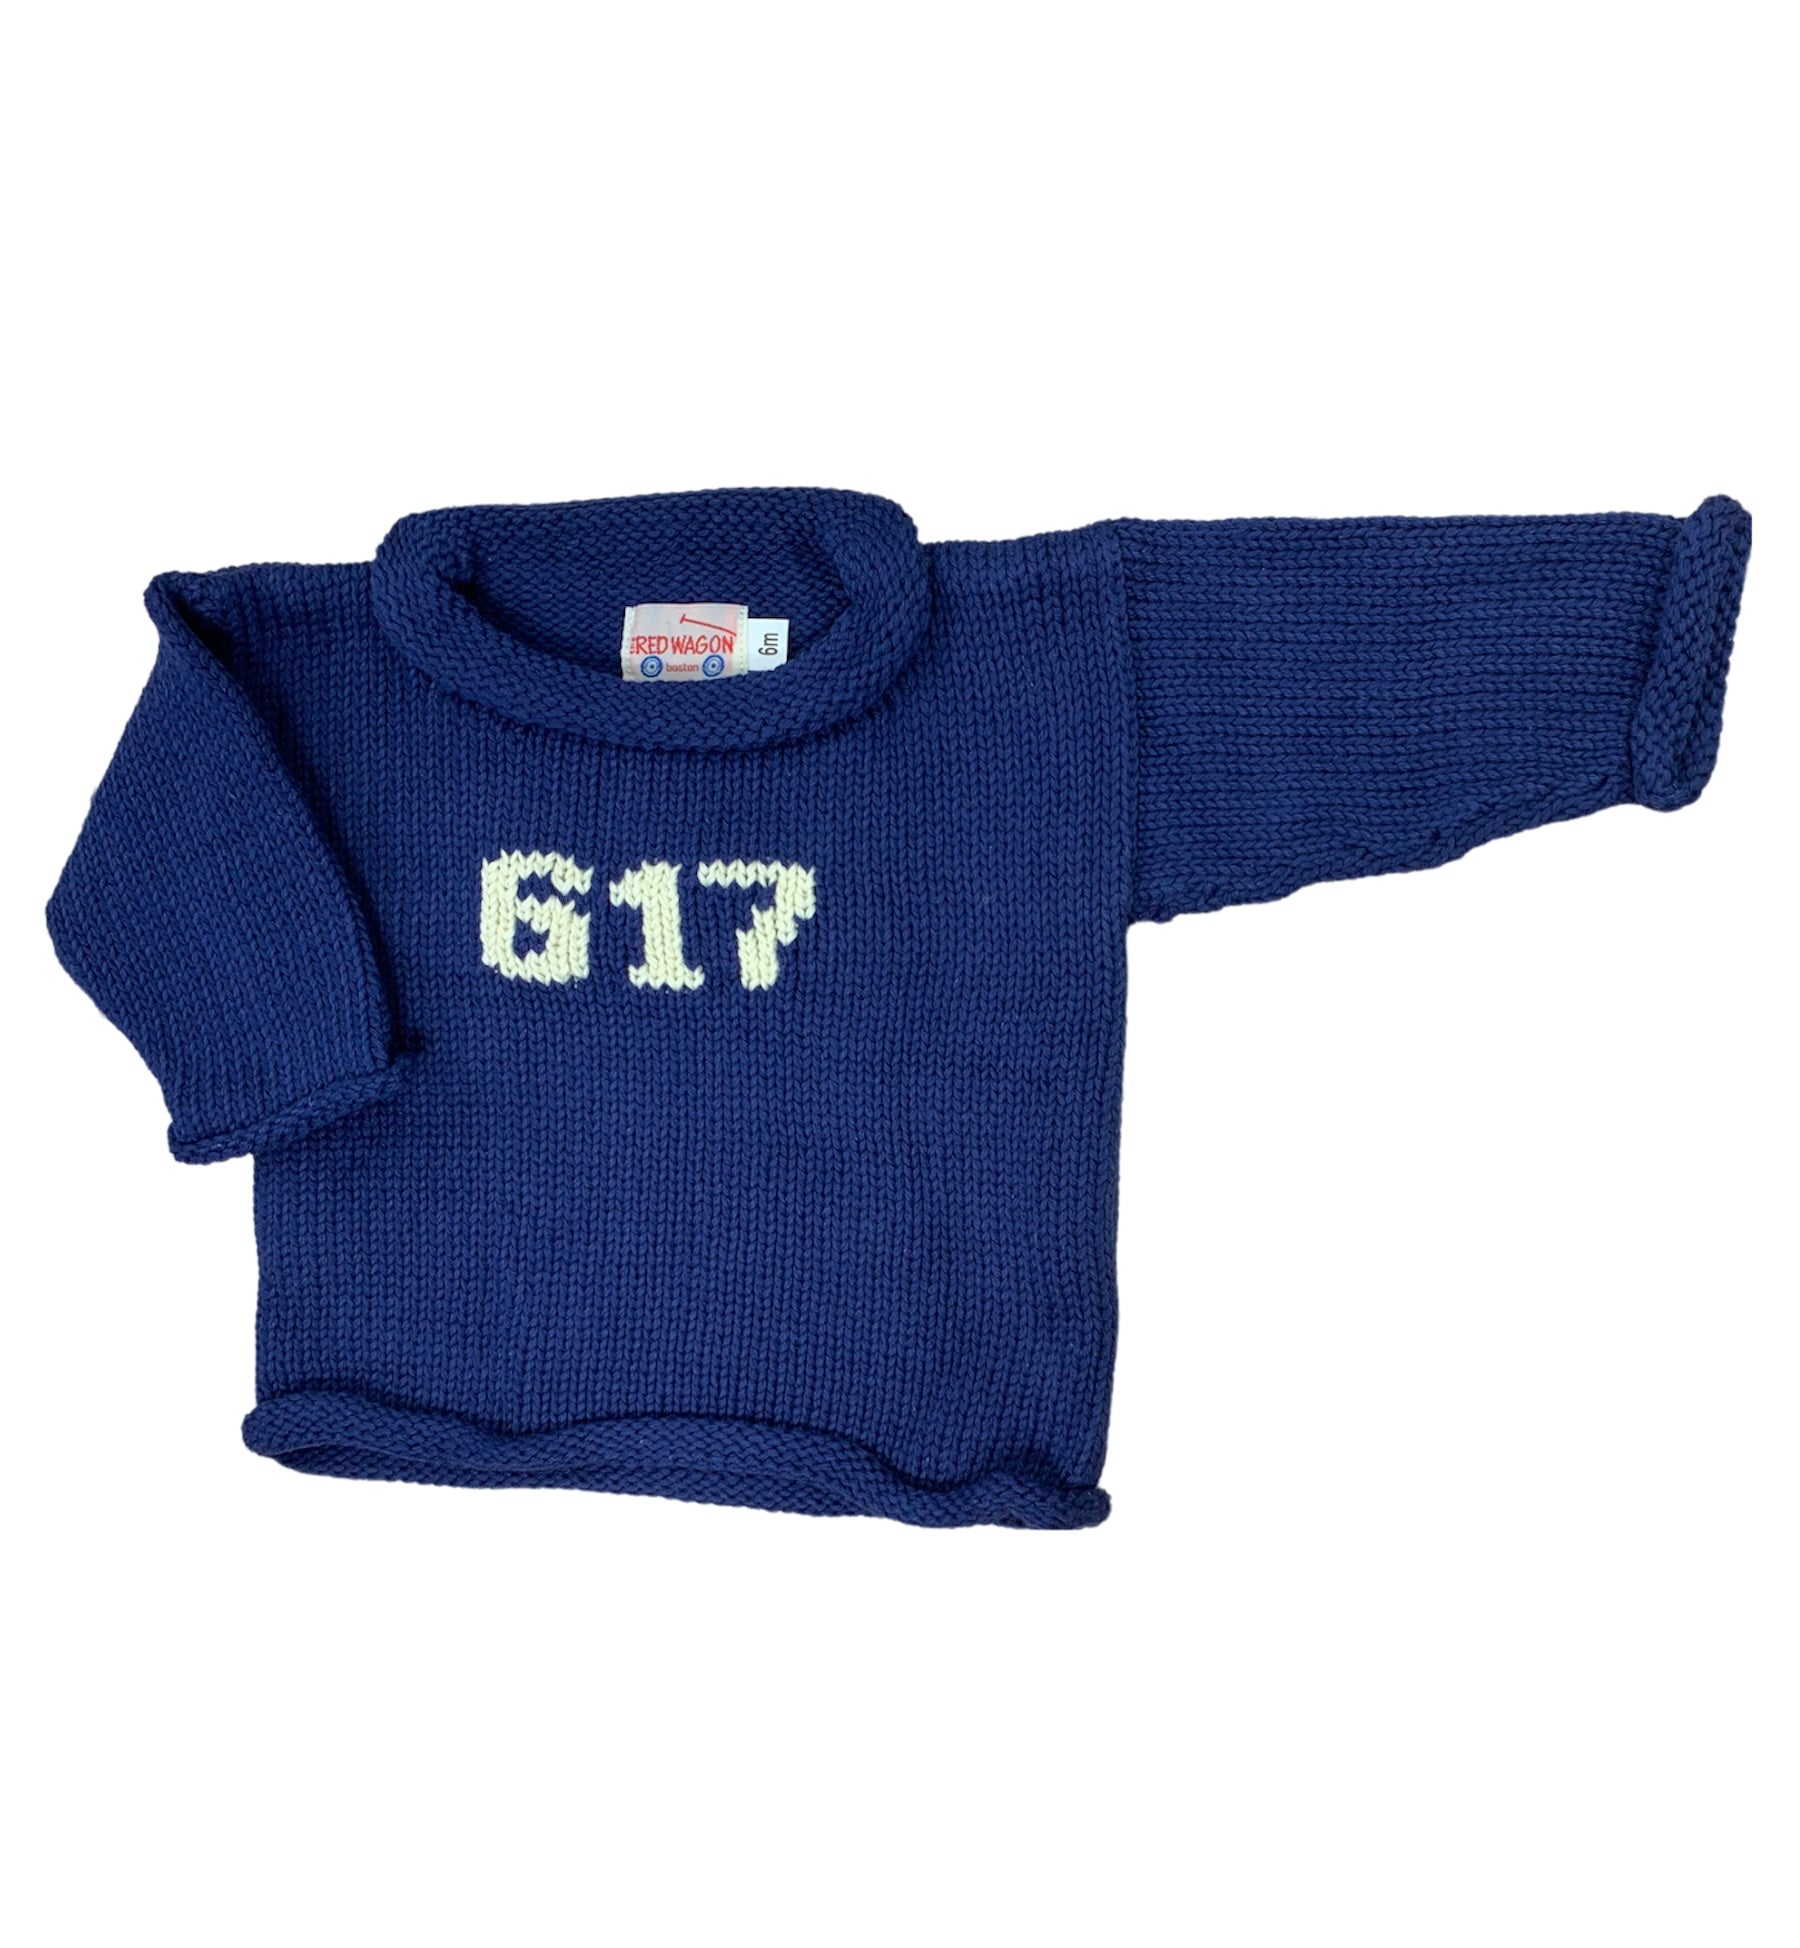 long sleeve navy blue sweater with 617 in ivory